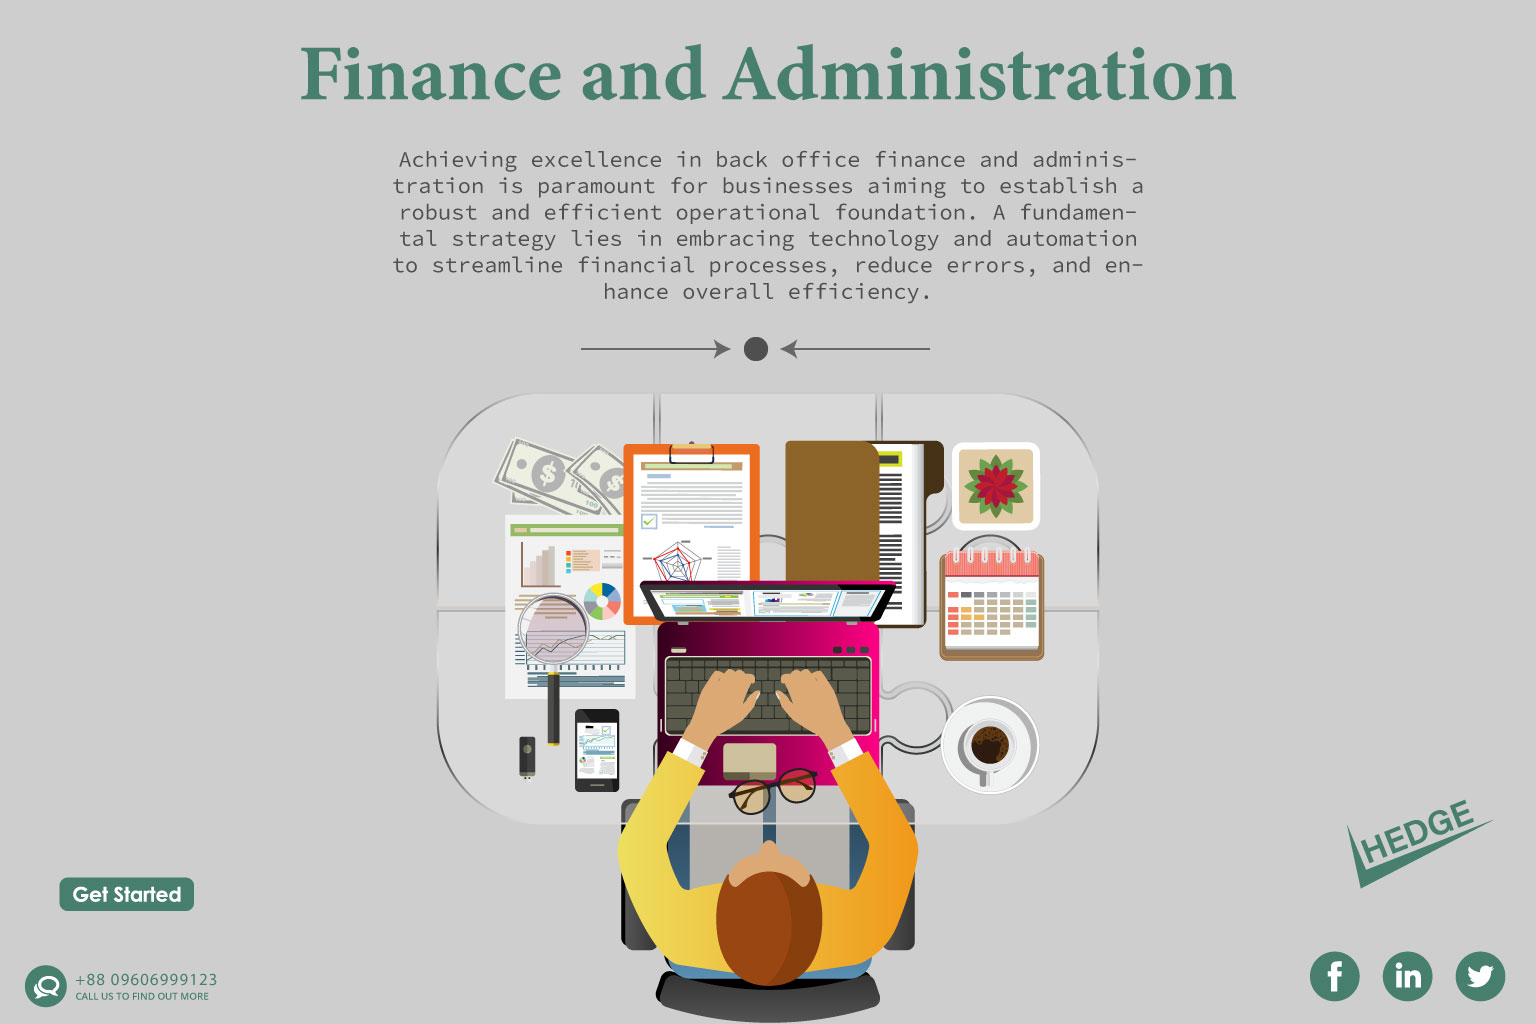 Finance and Administration